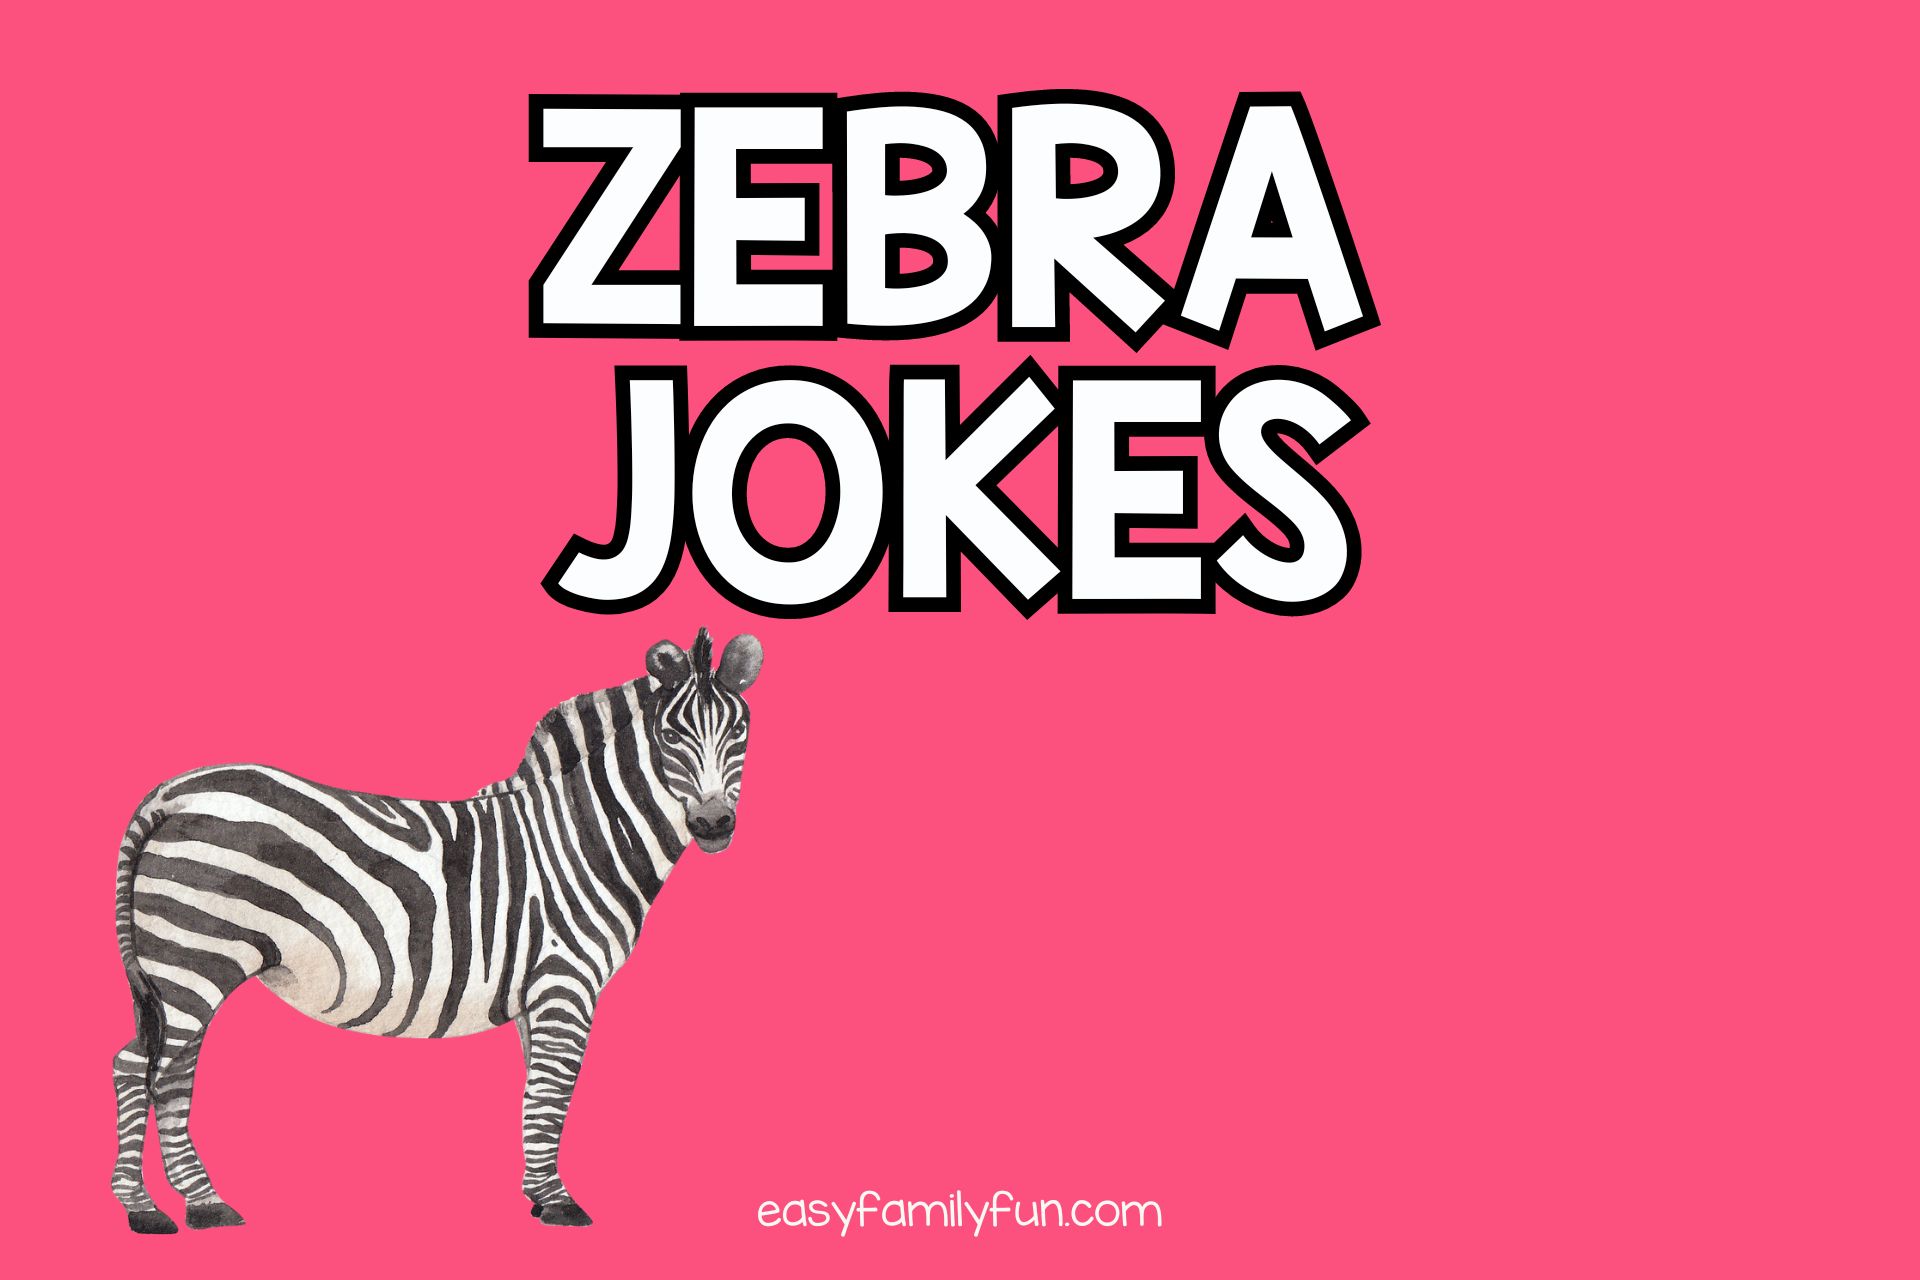 featured image with pink background and white text that says “zebra jokes”